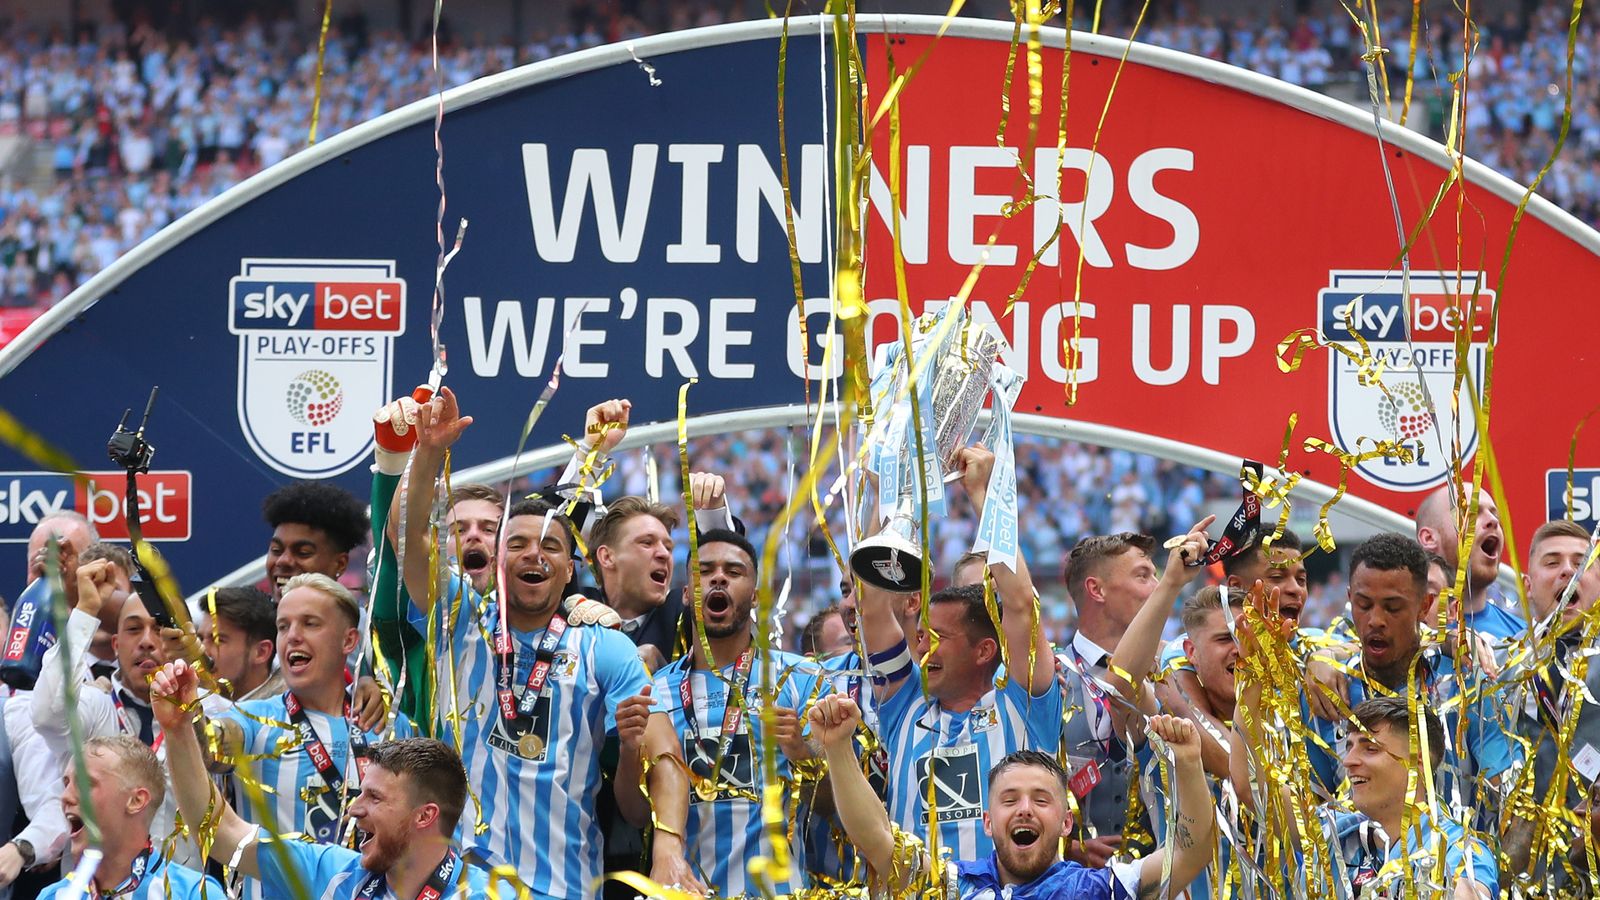 Sky Bet Championship – Play-Off Final 2017/18 